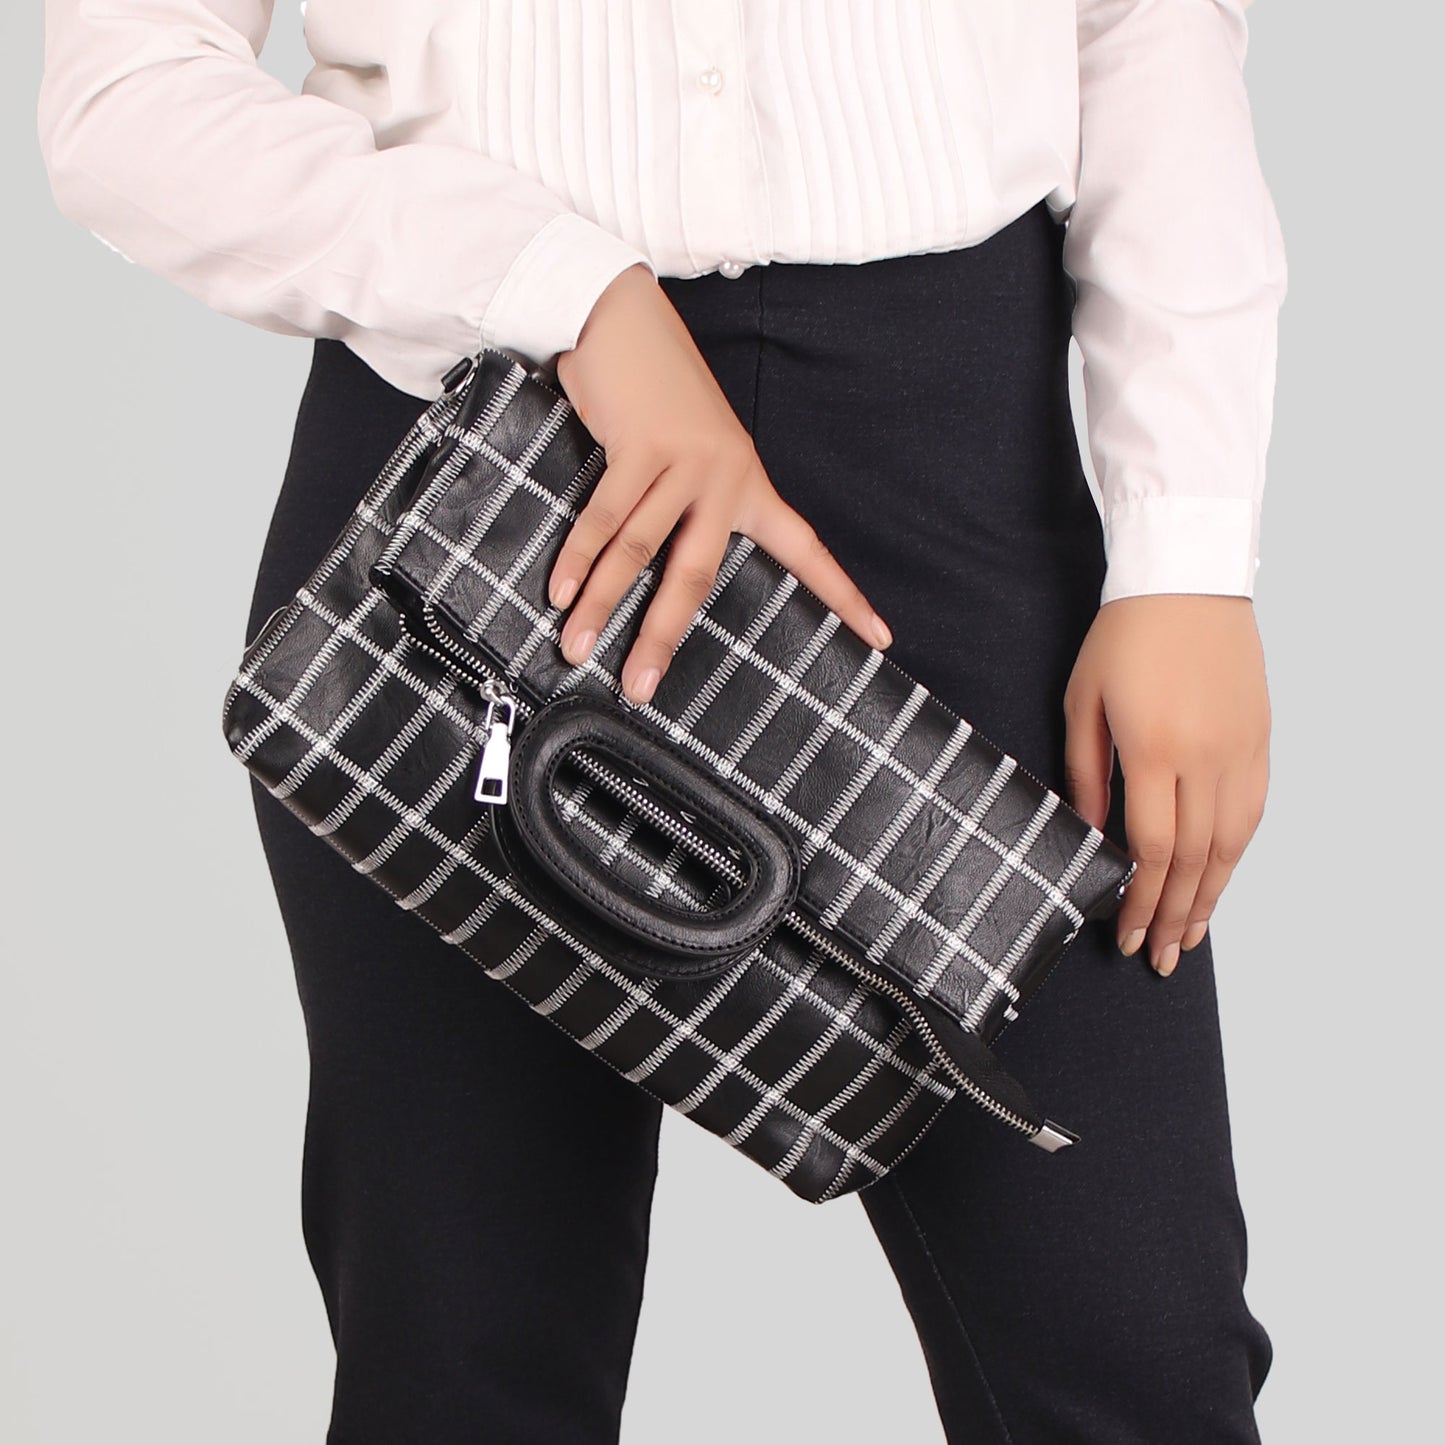 Sling Bag,The seamless Classical checkered Mix Bag in Black - Cippele Multi Store